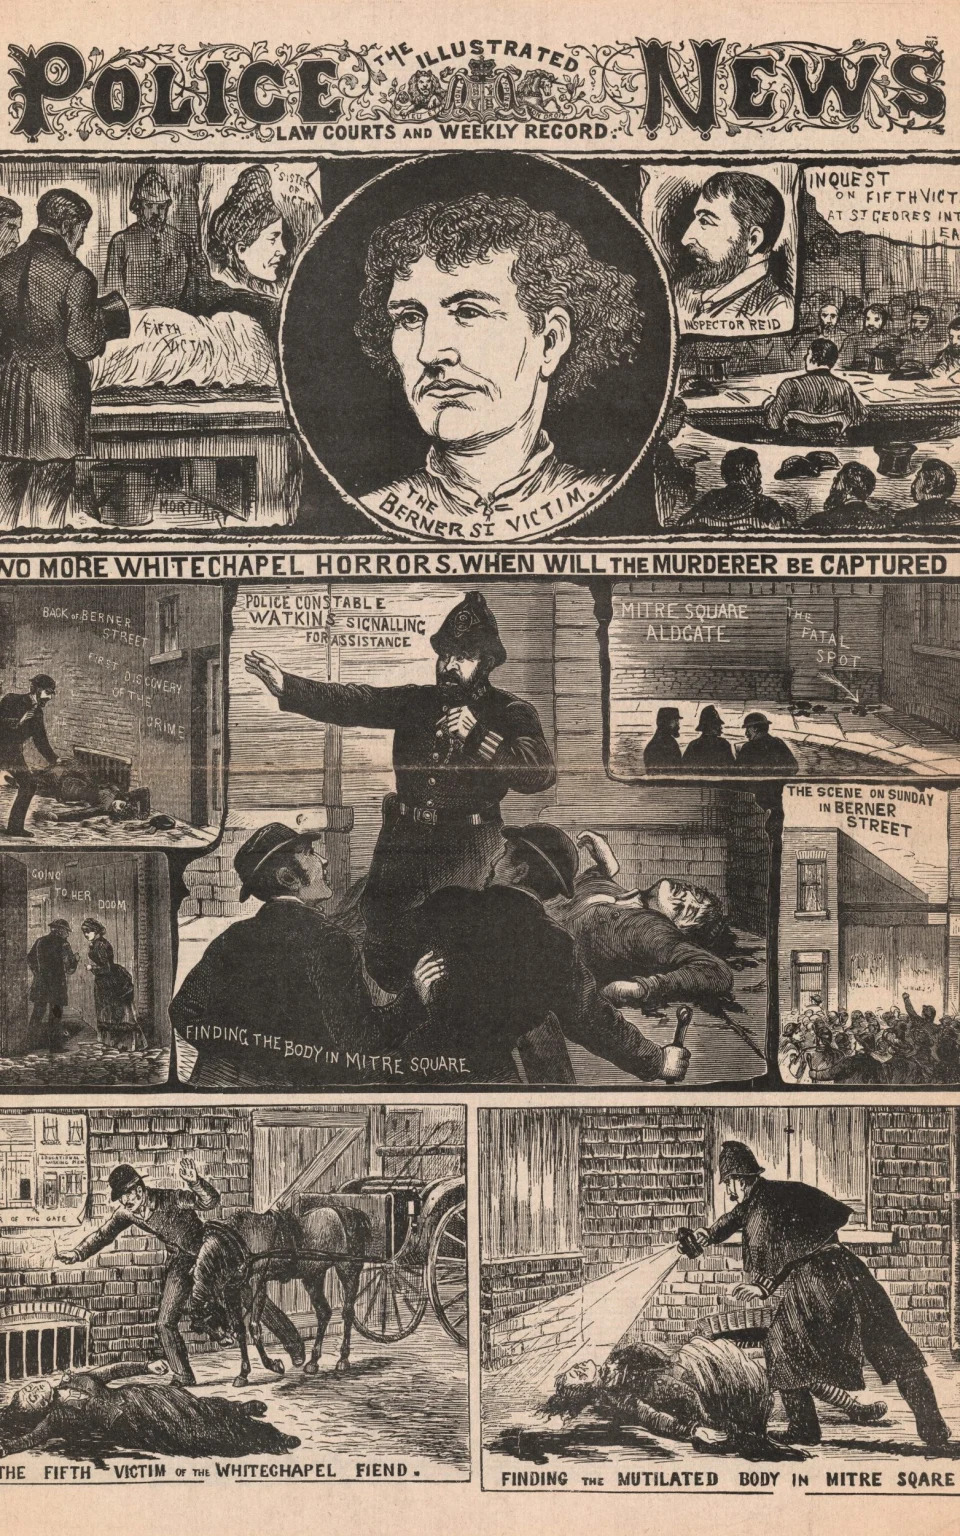 An 1888 Illustrated Police News front page reports on the murders